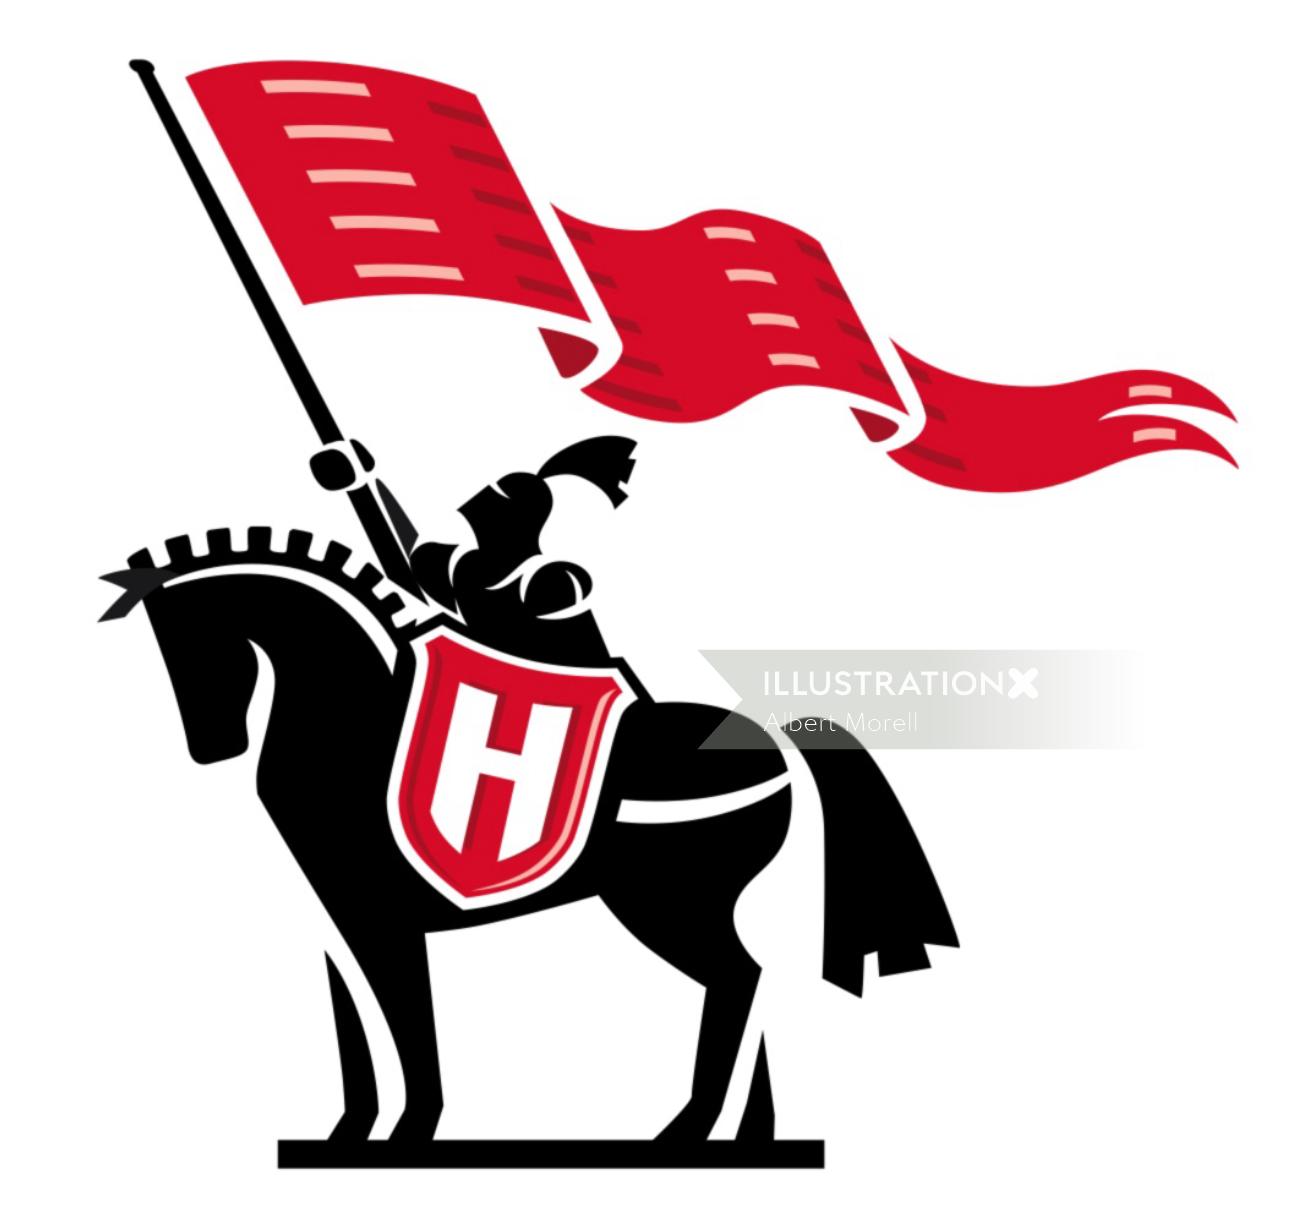 Knight and horse beer logo
